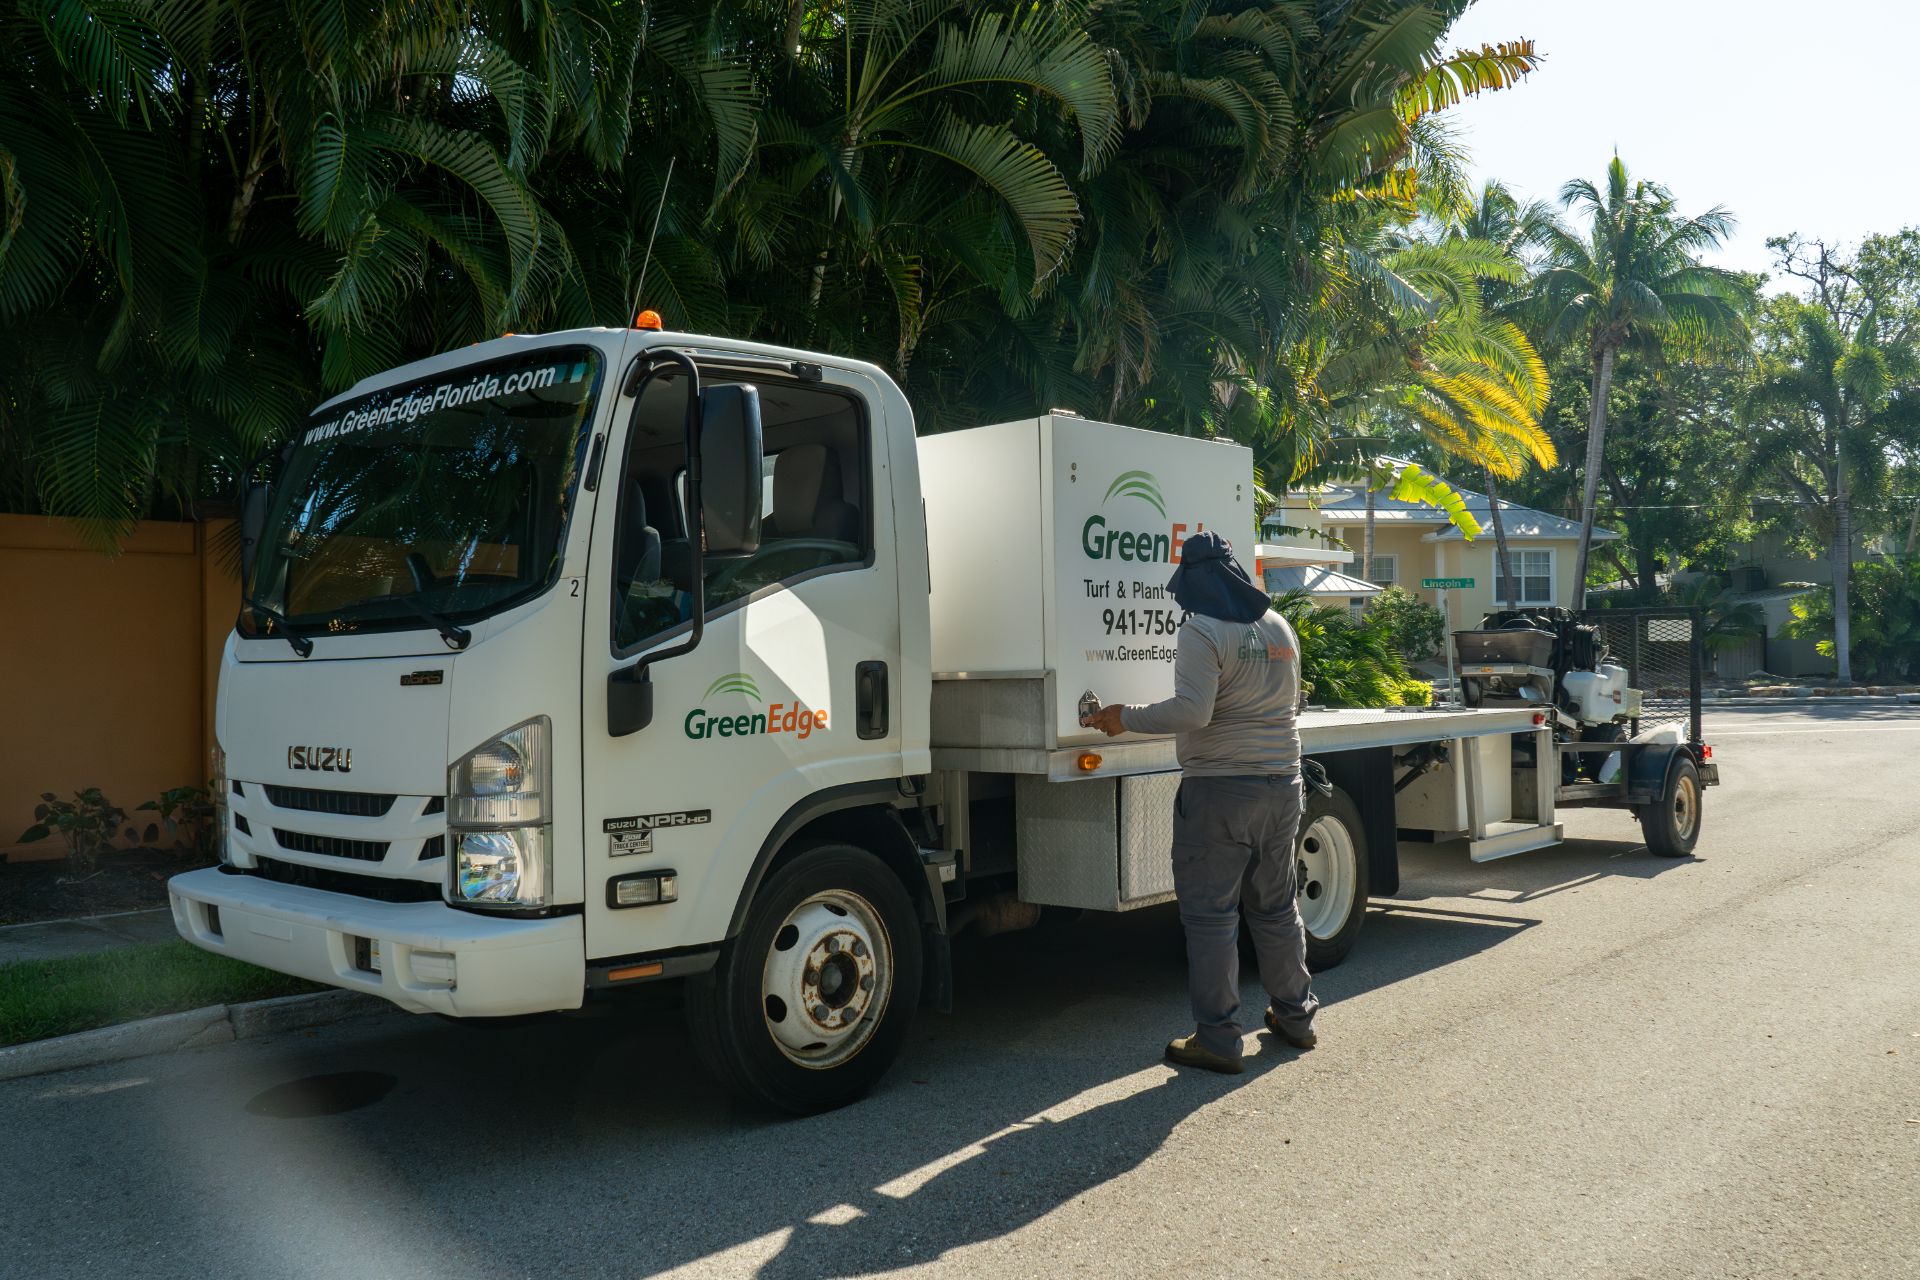 A GreenEdge staff member standing proudly beside the company truck in Sarasota. Our dedicated team utilizes the truck to efficiently transport equipment and materials for landscaping services. Trust GreenEdge for professional expertise and reliable service in maintaining and enhancing your outdoor spaces.